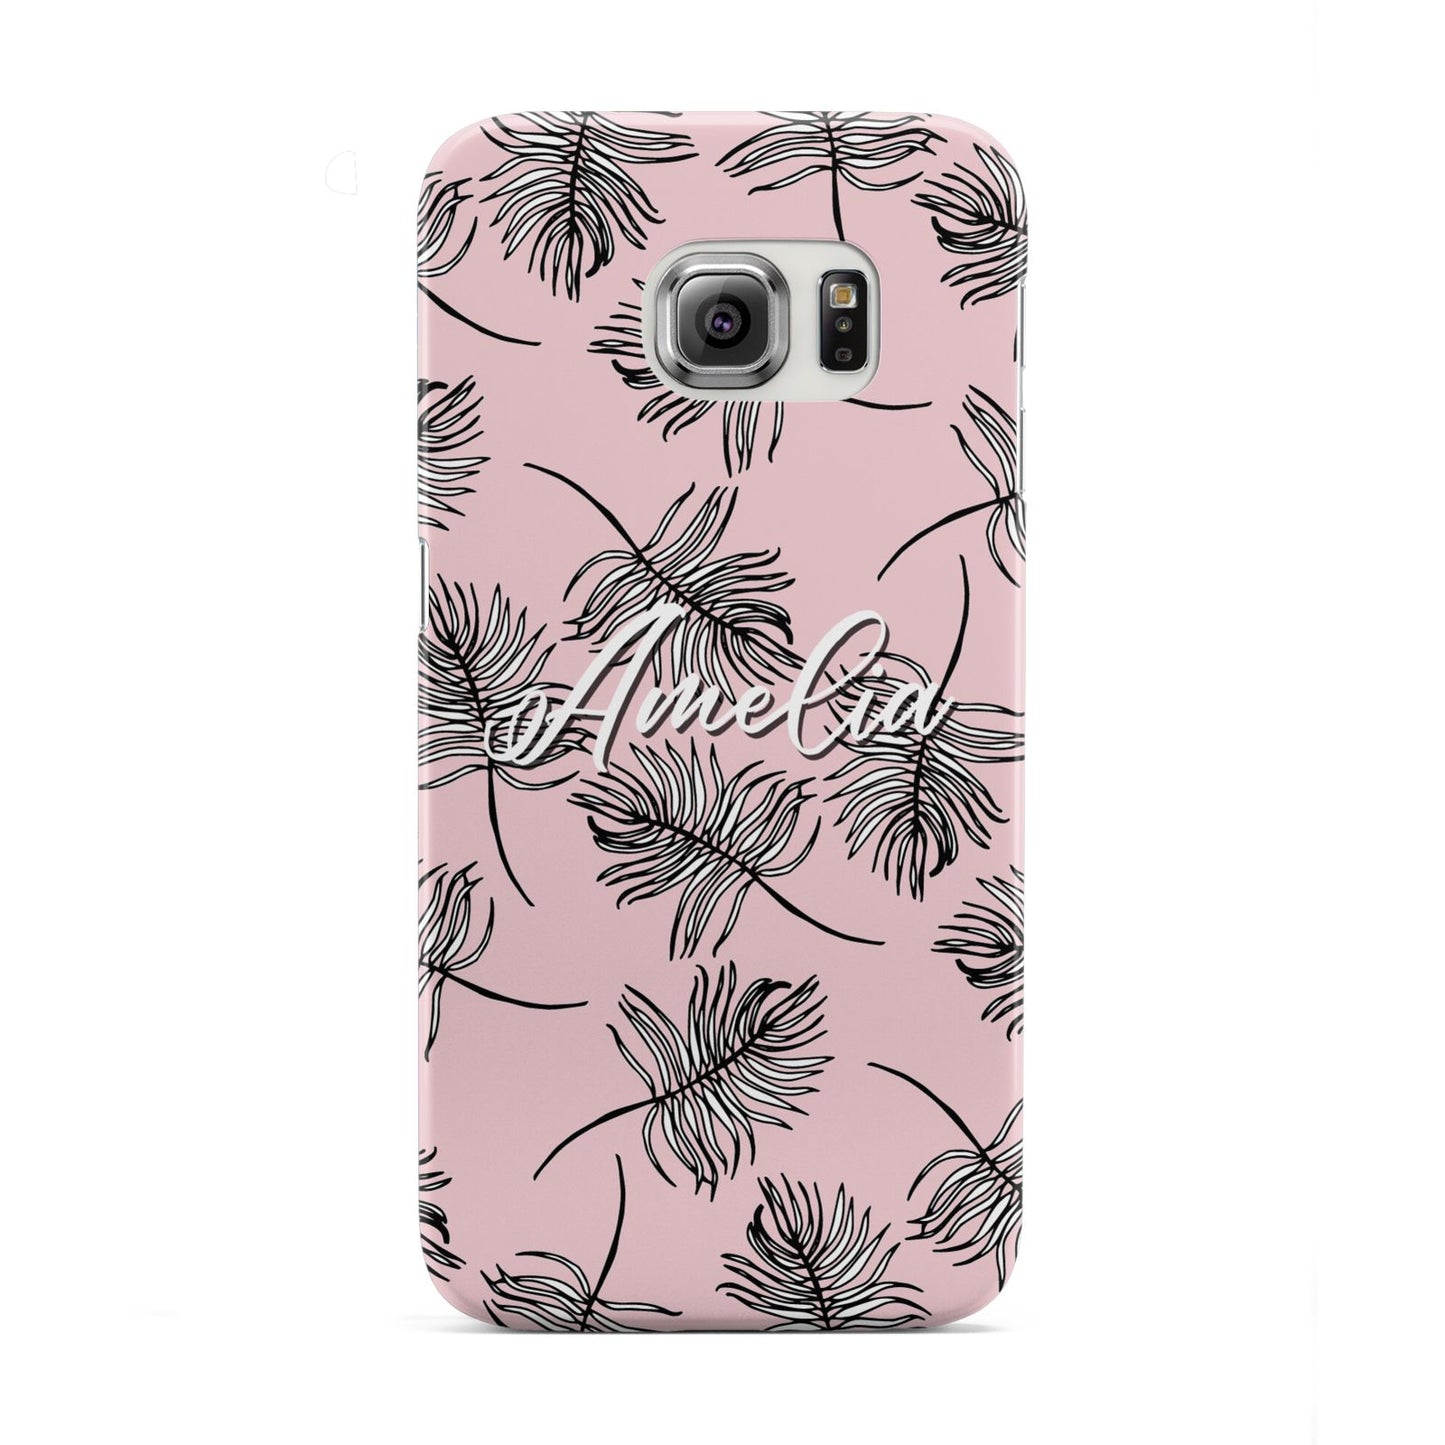 Personalised Pink Monochrome Tropical Leaf Samsung Galaxy S6 Edge Case